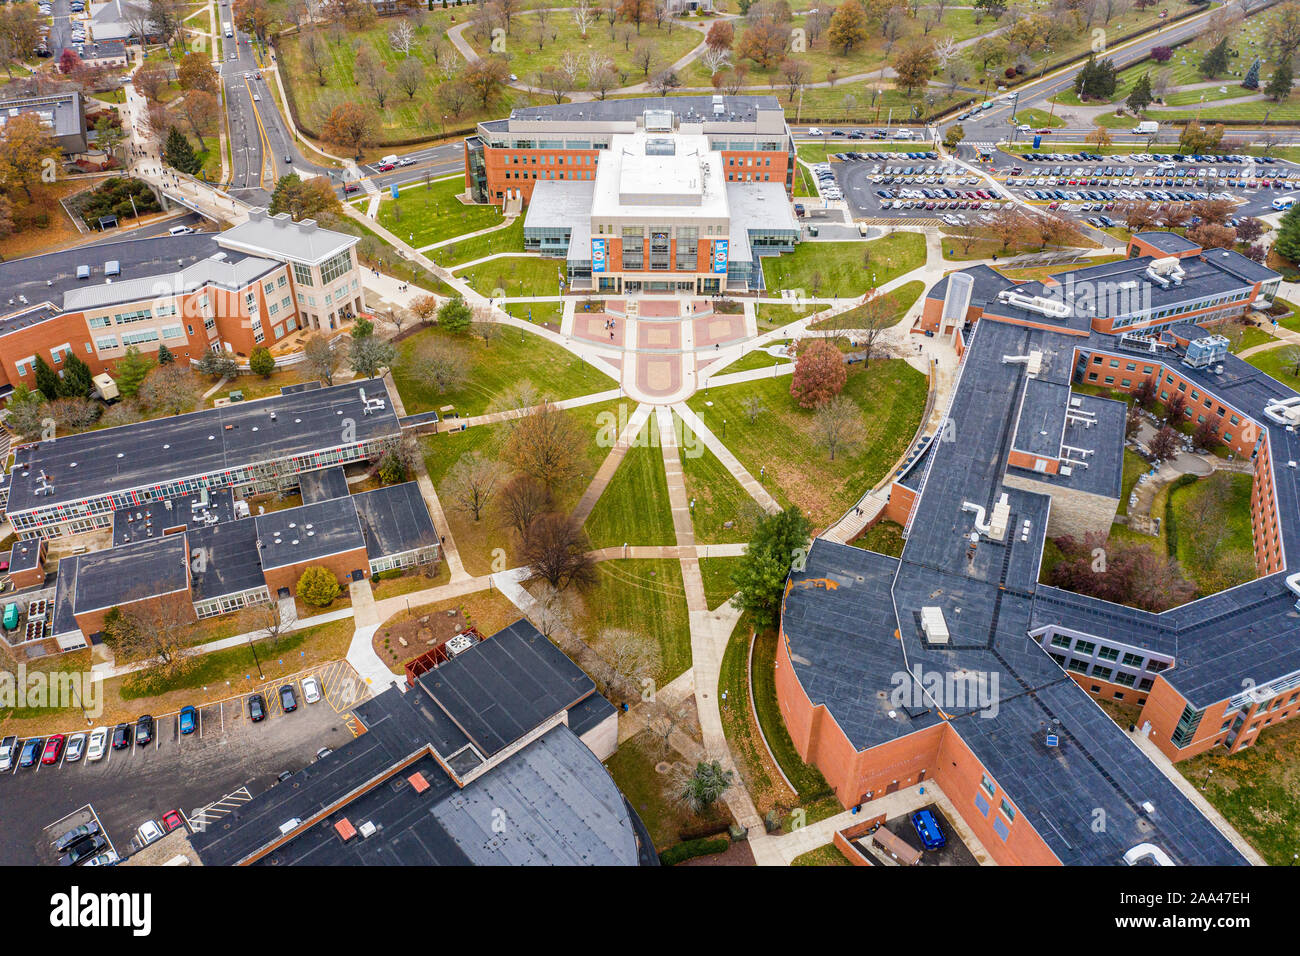 Southern Connecticut State University, New Haven, CT, USA Stockfoto